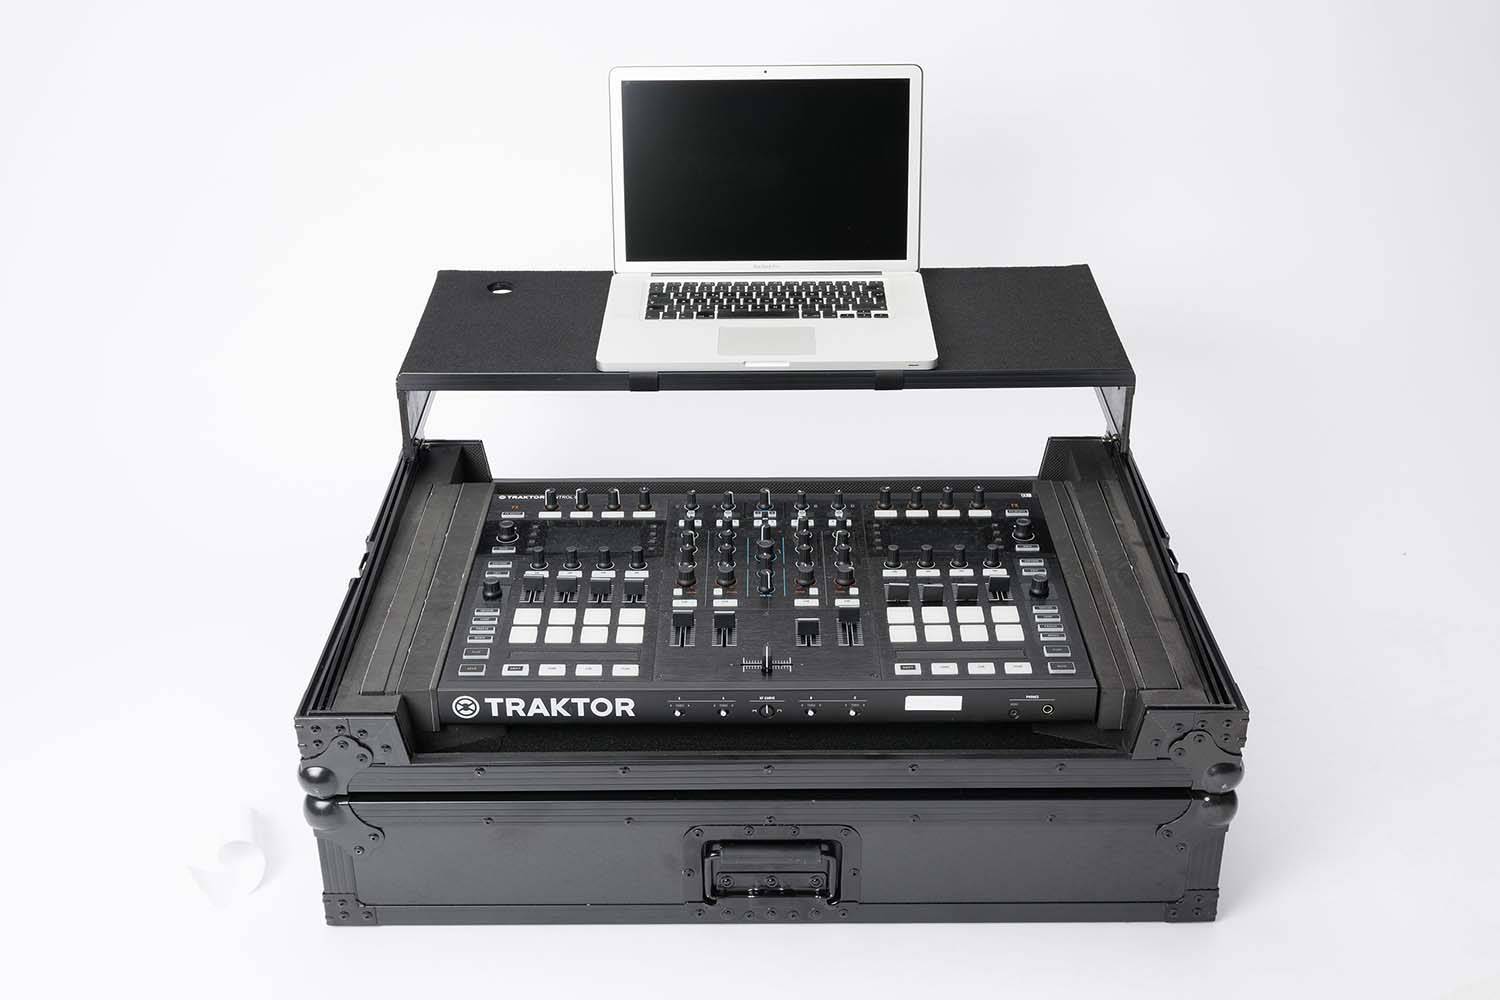 Magma DJ Package with MGA40982 Multi-Format DJ Workstation Case and Reloop MIXON-4 Hybrid DJ Controller - Hollywood DJ